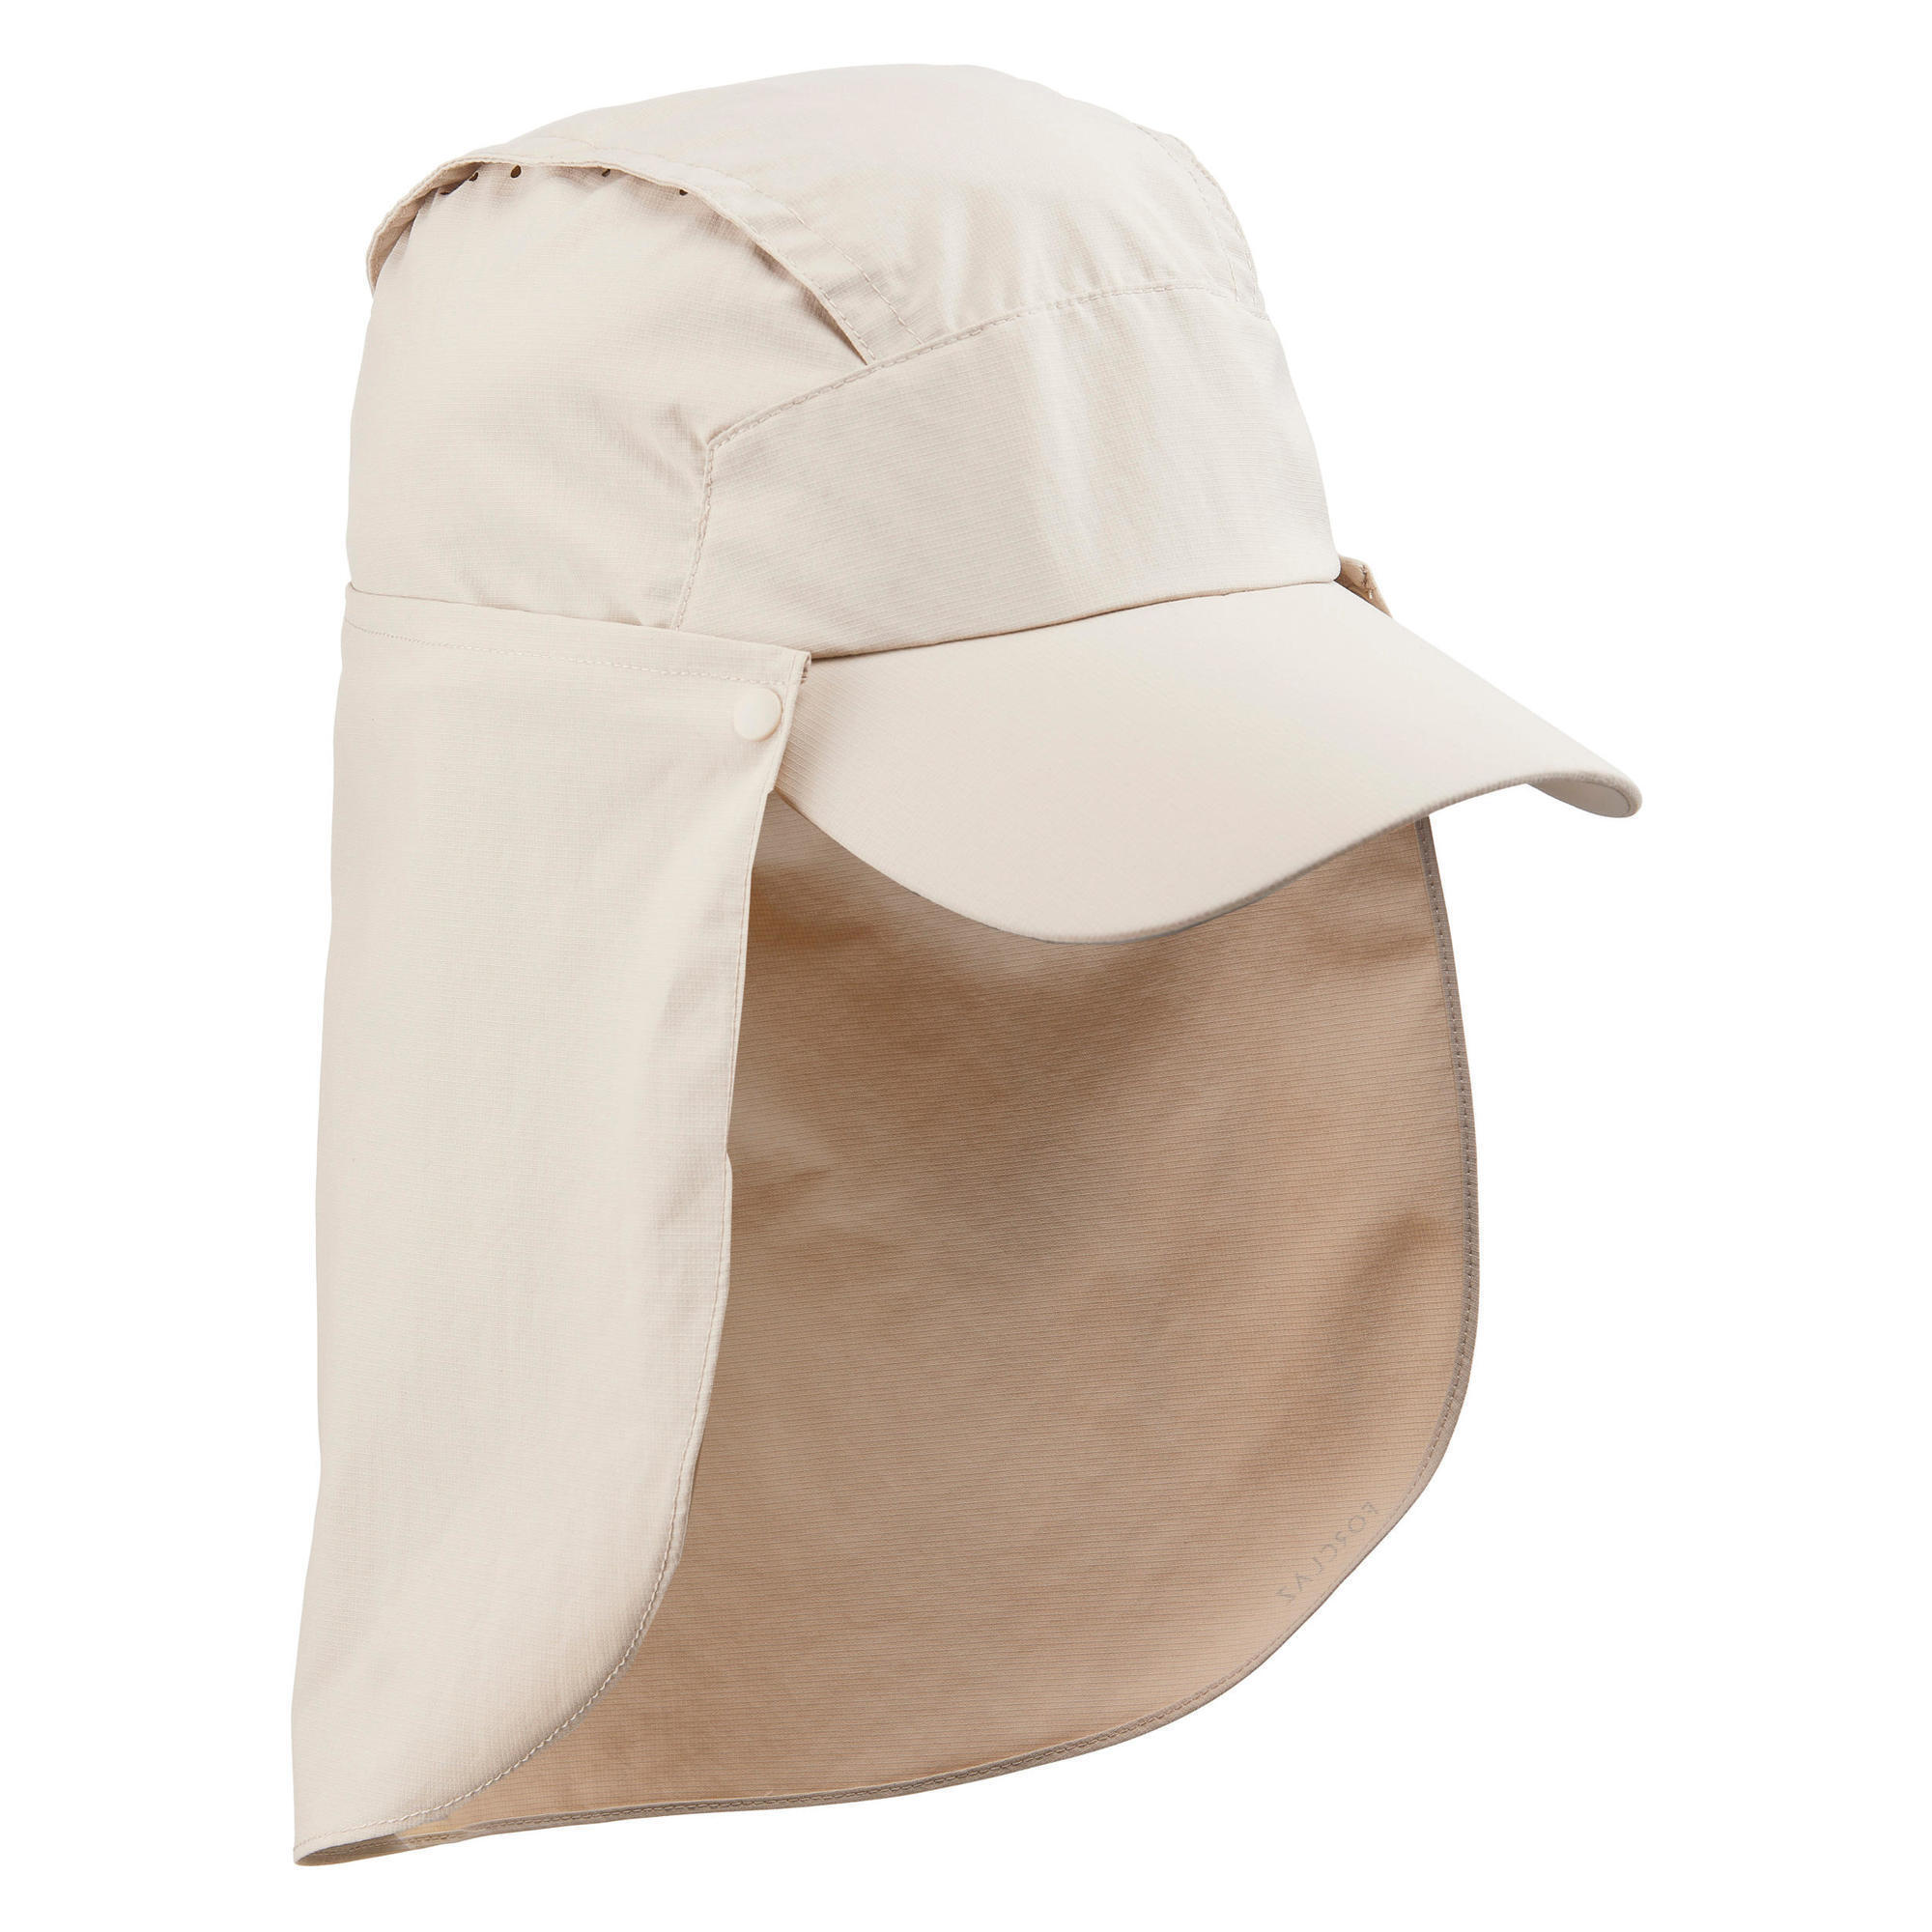 Anti-UV Cap with Removable Neck Protection - Beige 1/7